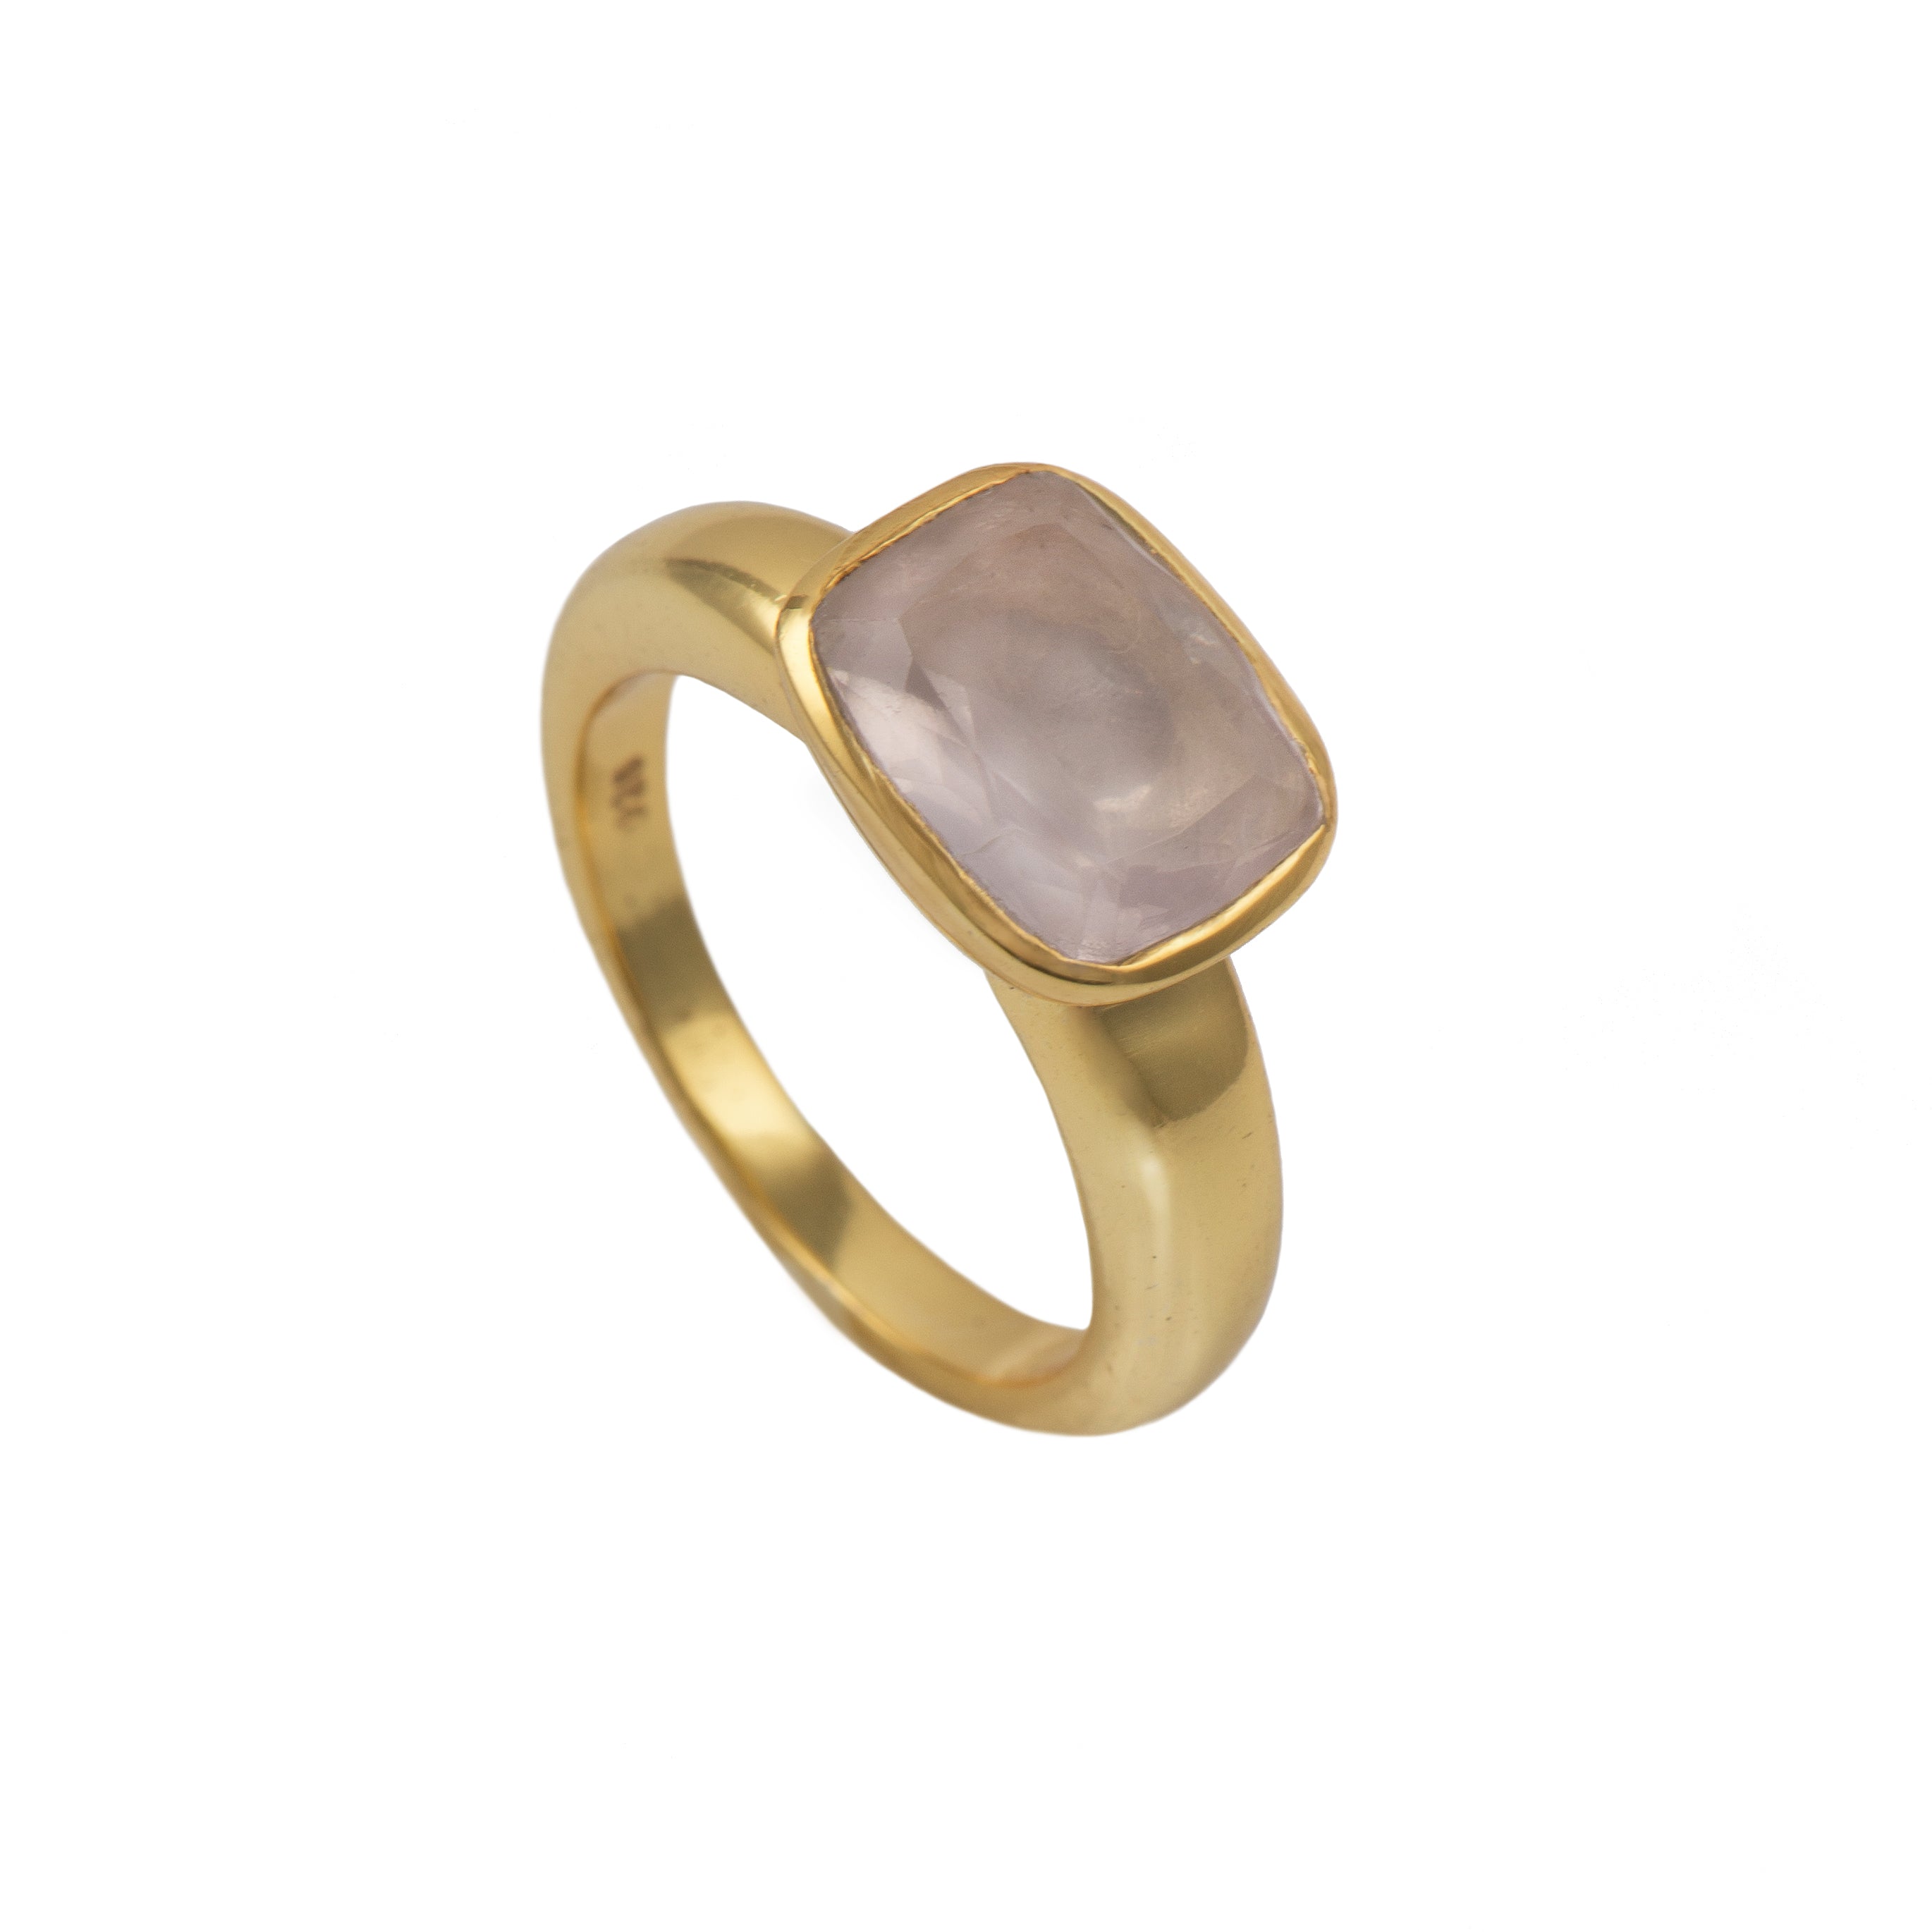 Faceted Rectangular Cut Natural Gemstone Gold Plated Sterling Silver Ring - Rose Quartz